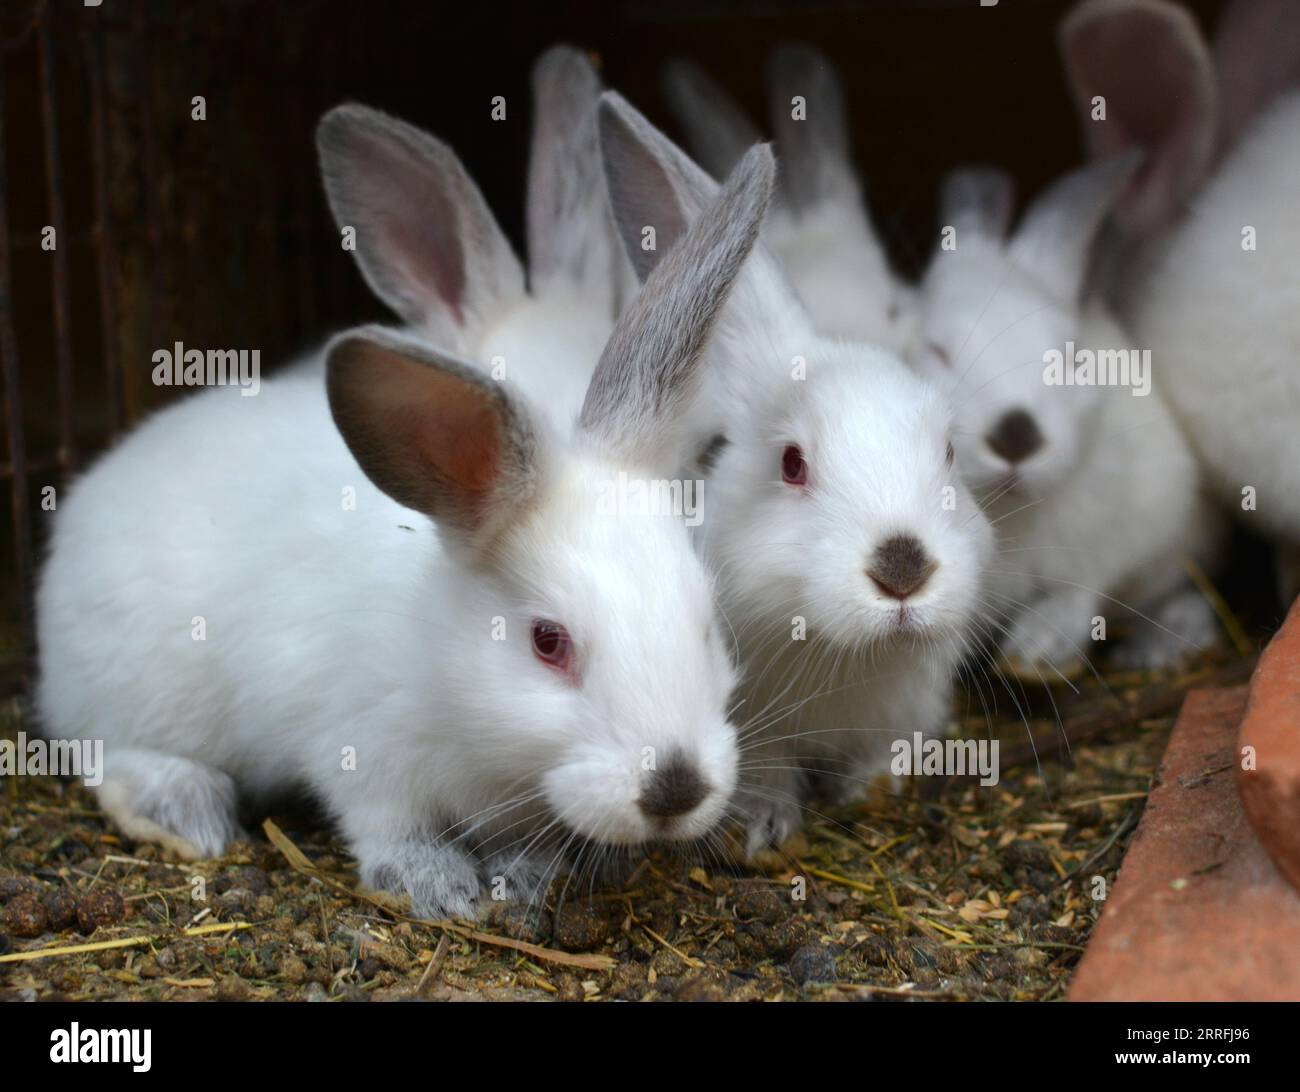 An young rabbits of the Californian breed Stock Photo